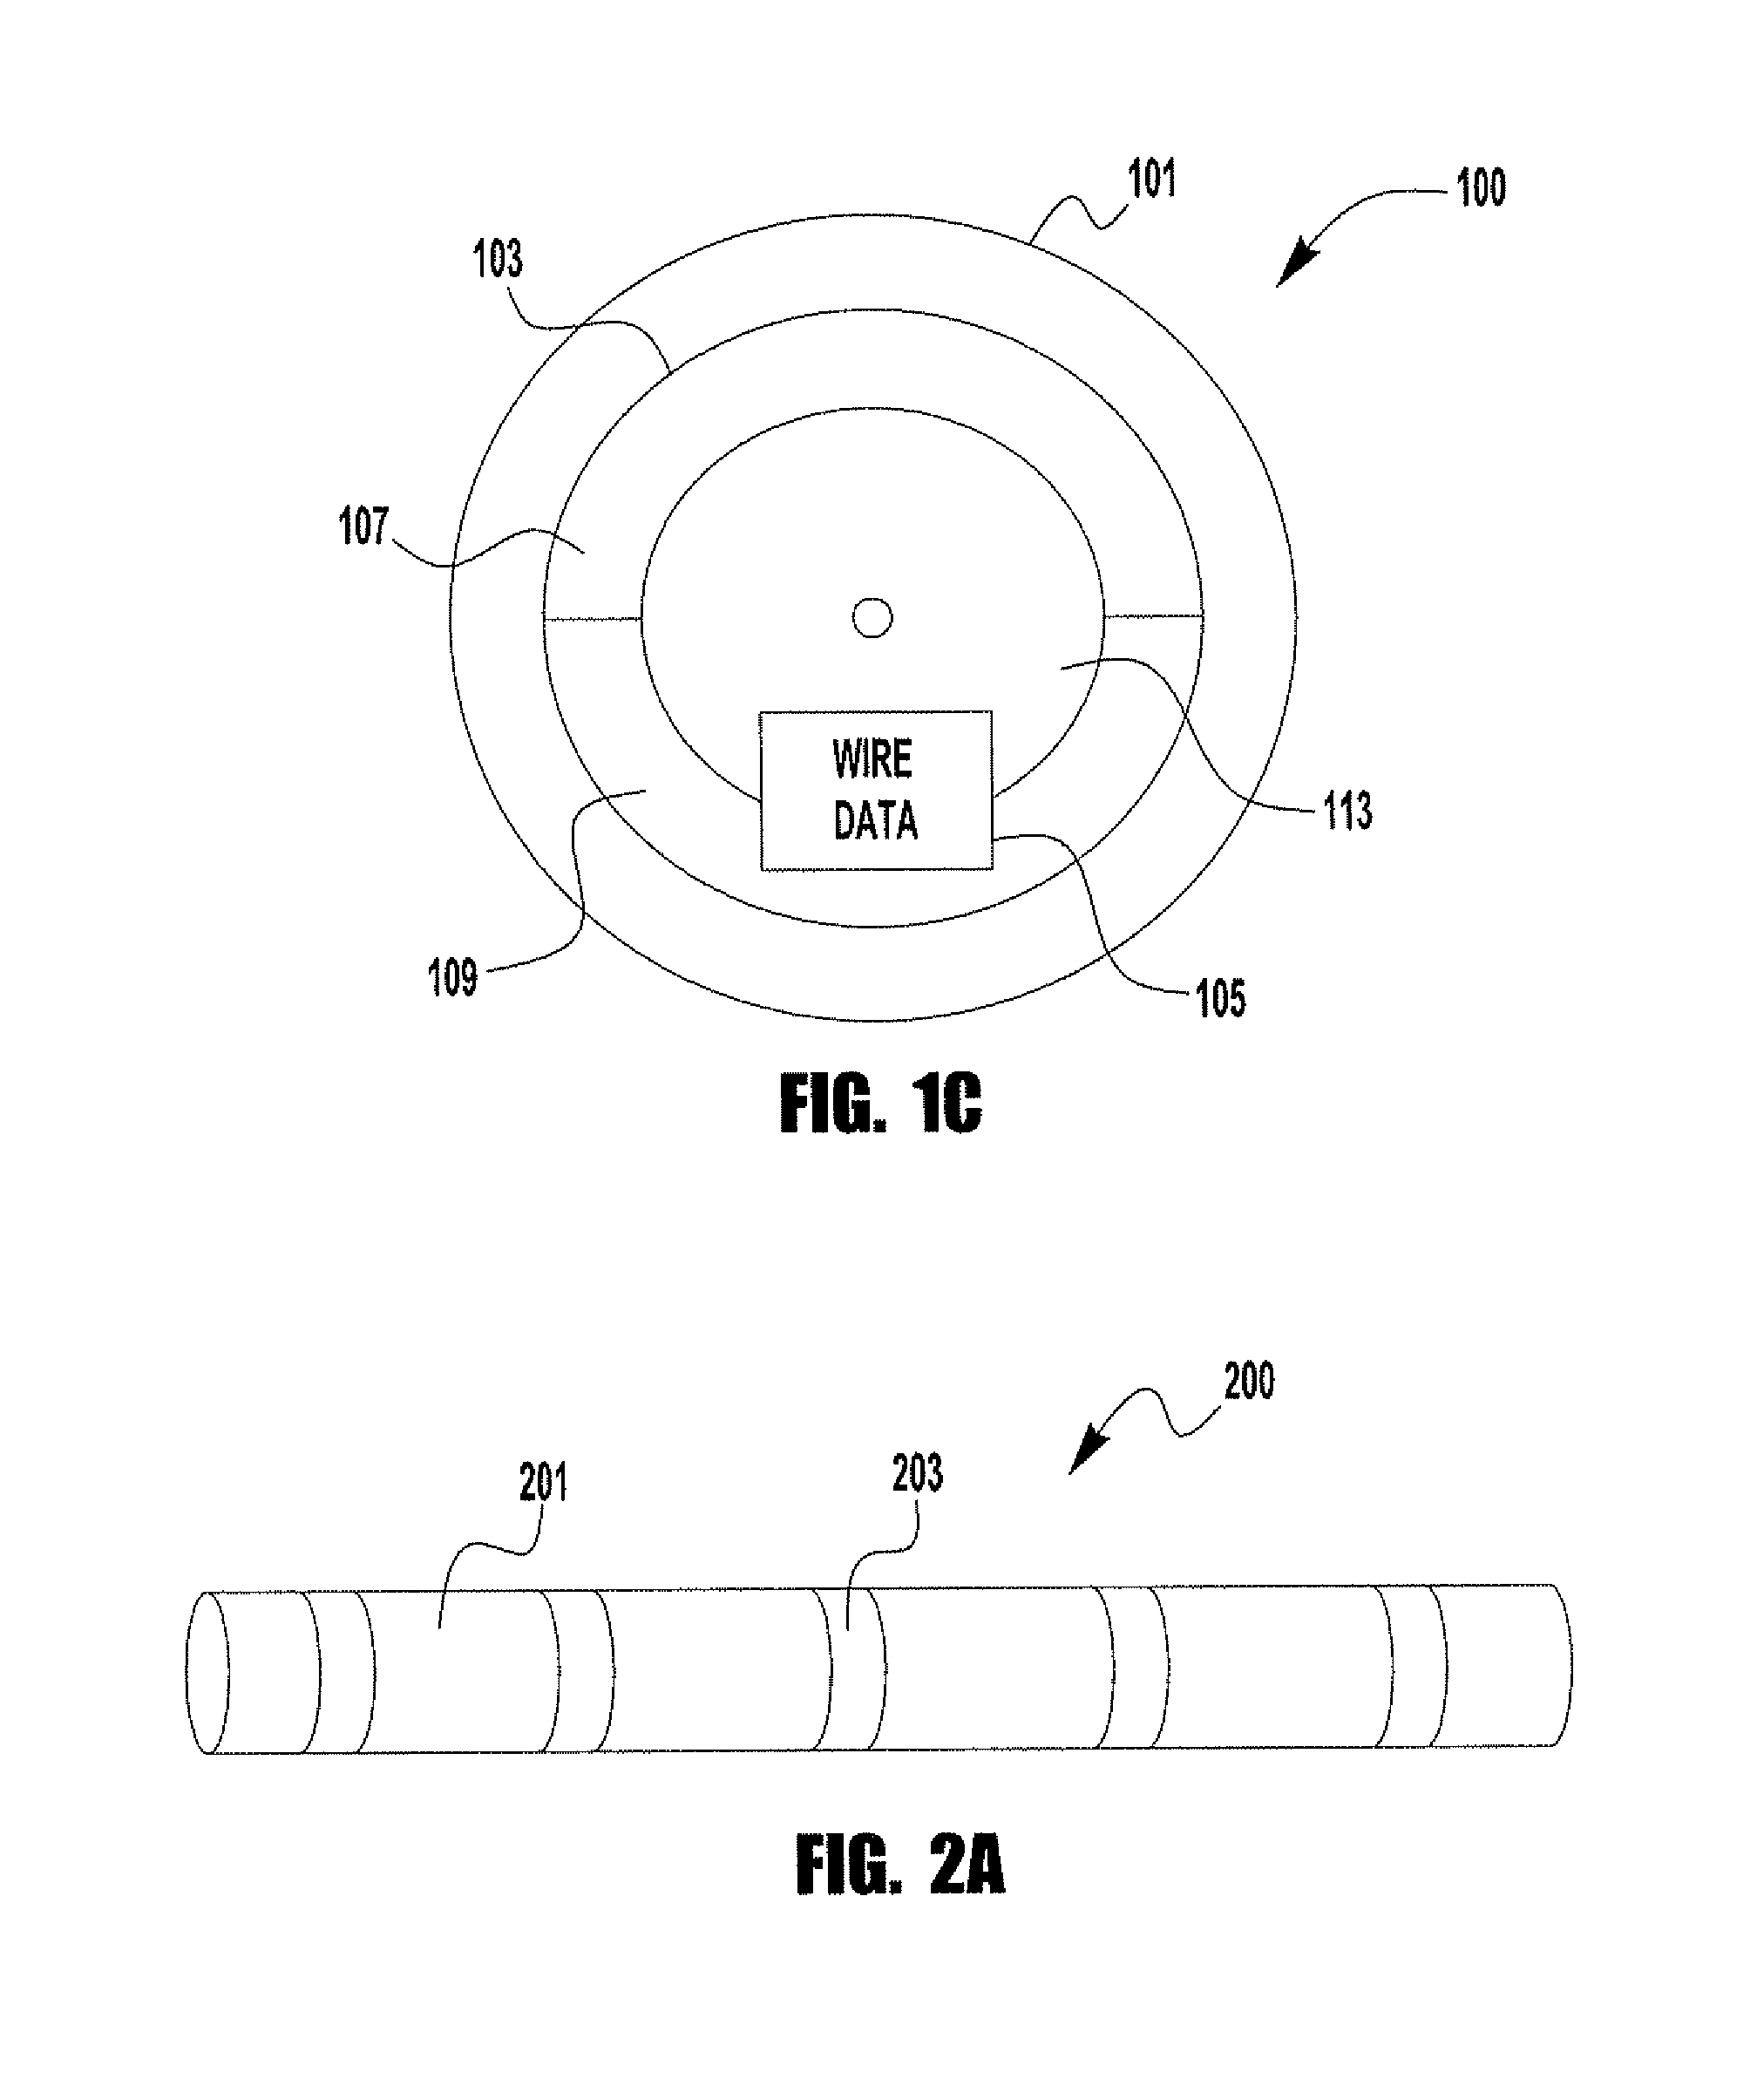 Synergistic welding and electrode selection and identification method